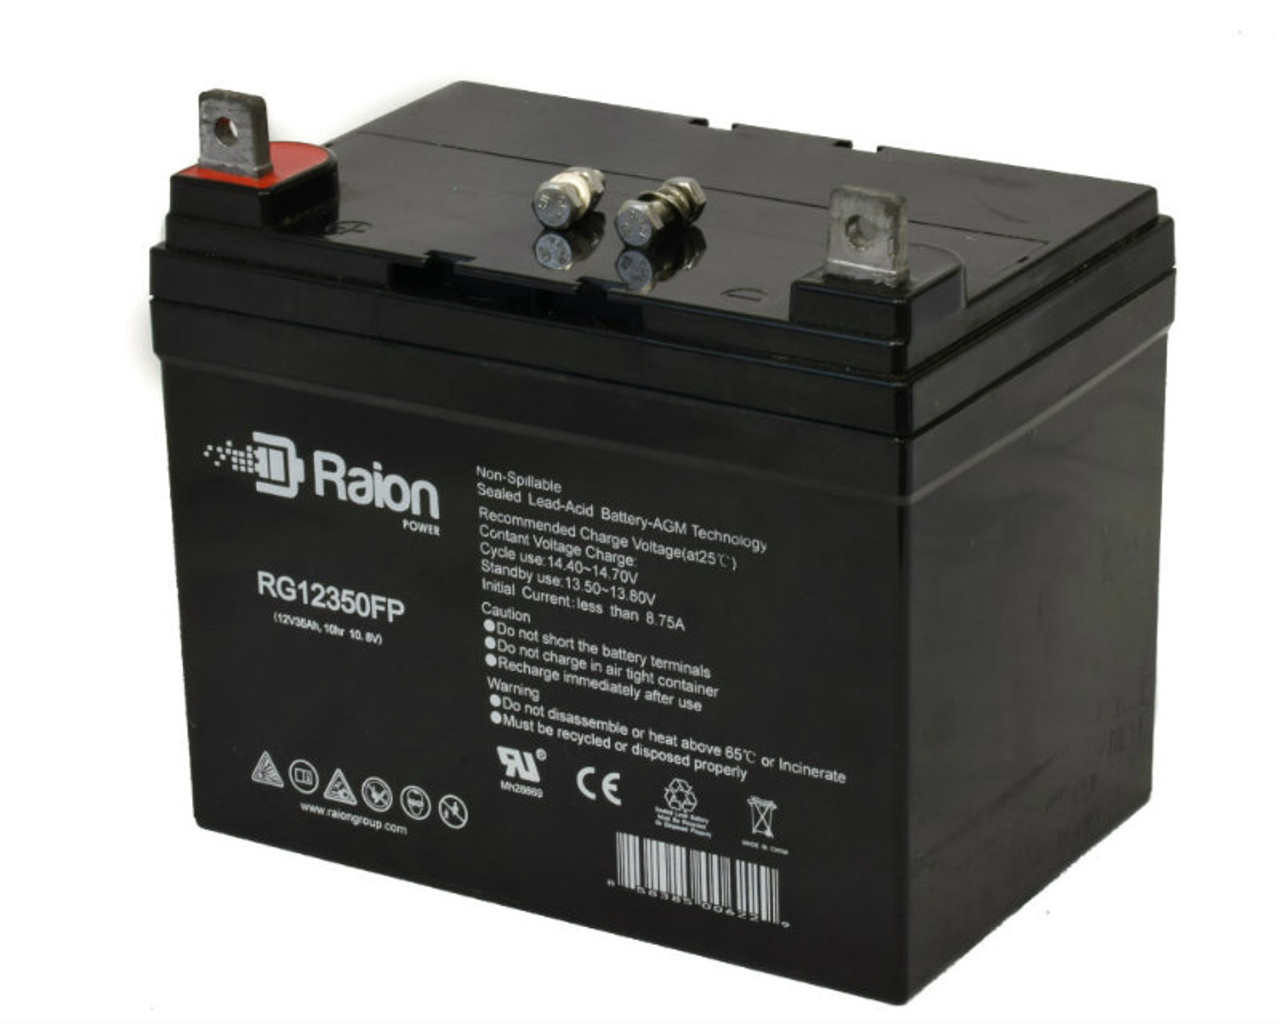 Raion Power Replacement 12V 35Ah RG12350FP Battery for Ariens/Gravely EZR 2050